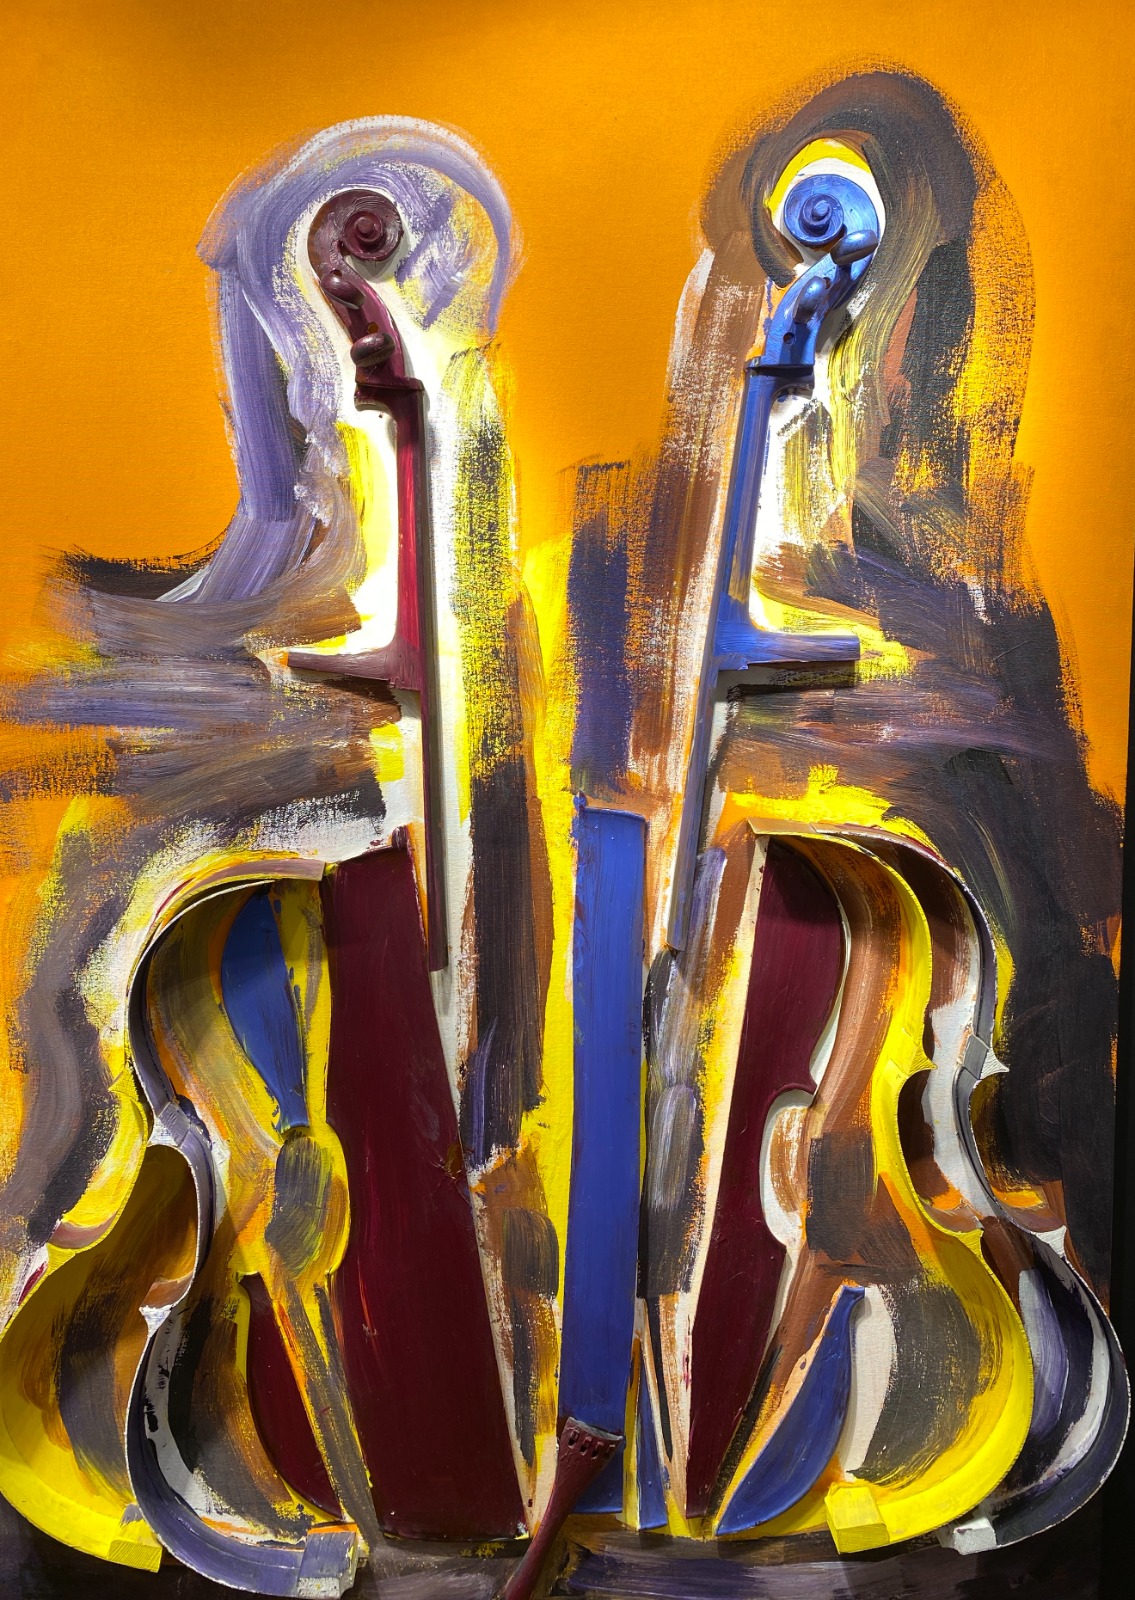 Arman - Serious Paintings II - Sliced cello with acrylic on canavs - 165.1x106.1x11.4 cm